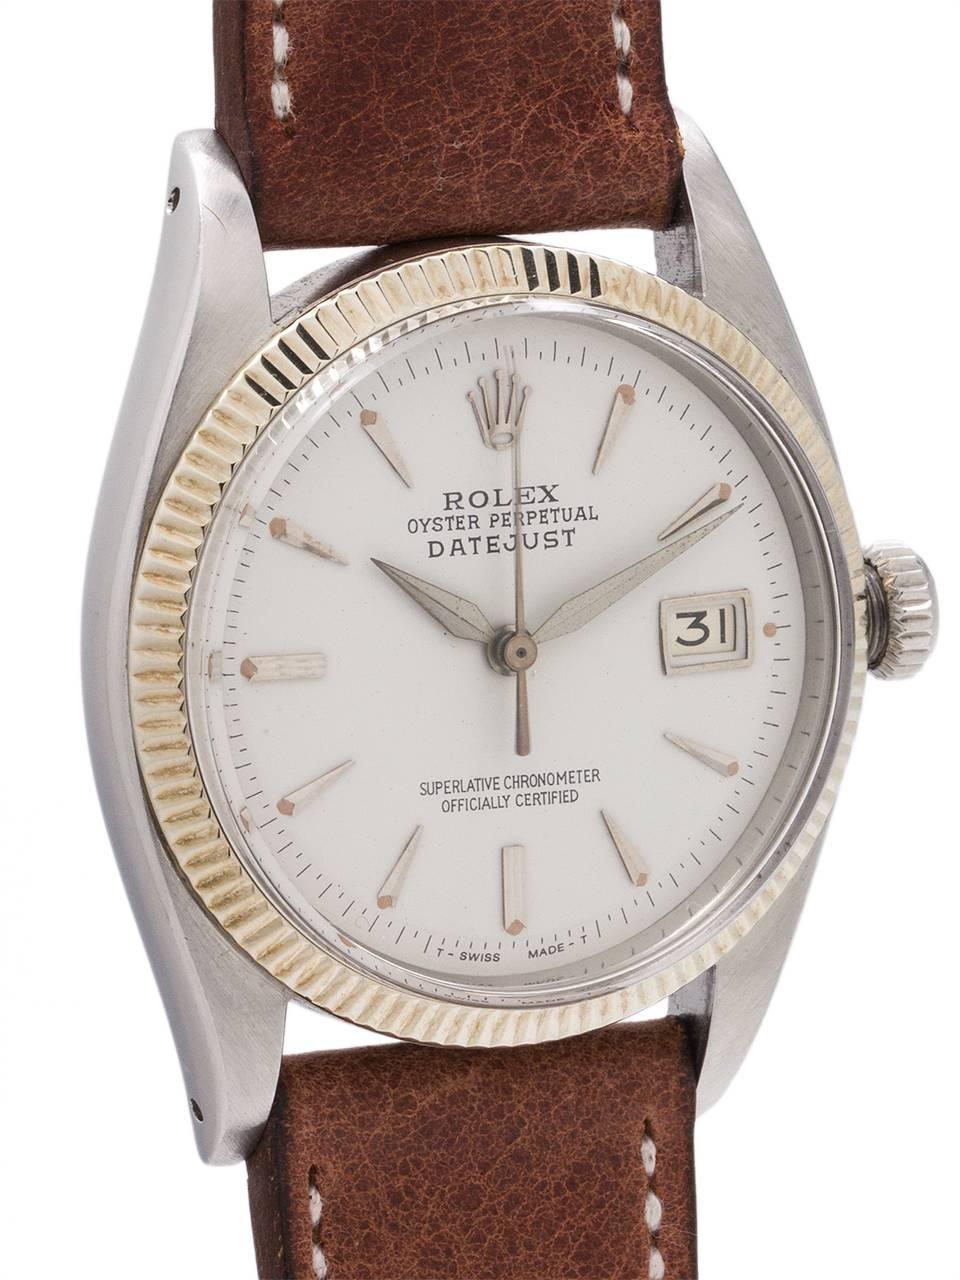 
An early, and exceptional condition Rolex Datejust model ref 6605 serial # 457,xxx circa 1959. Featuring 36mm diameter case with 14K white gold fine milled bezel, acrylic crystal without magnifying cyclops, a refinished antique white dial with